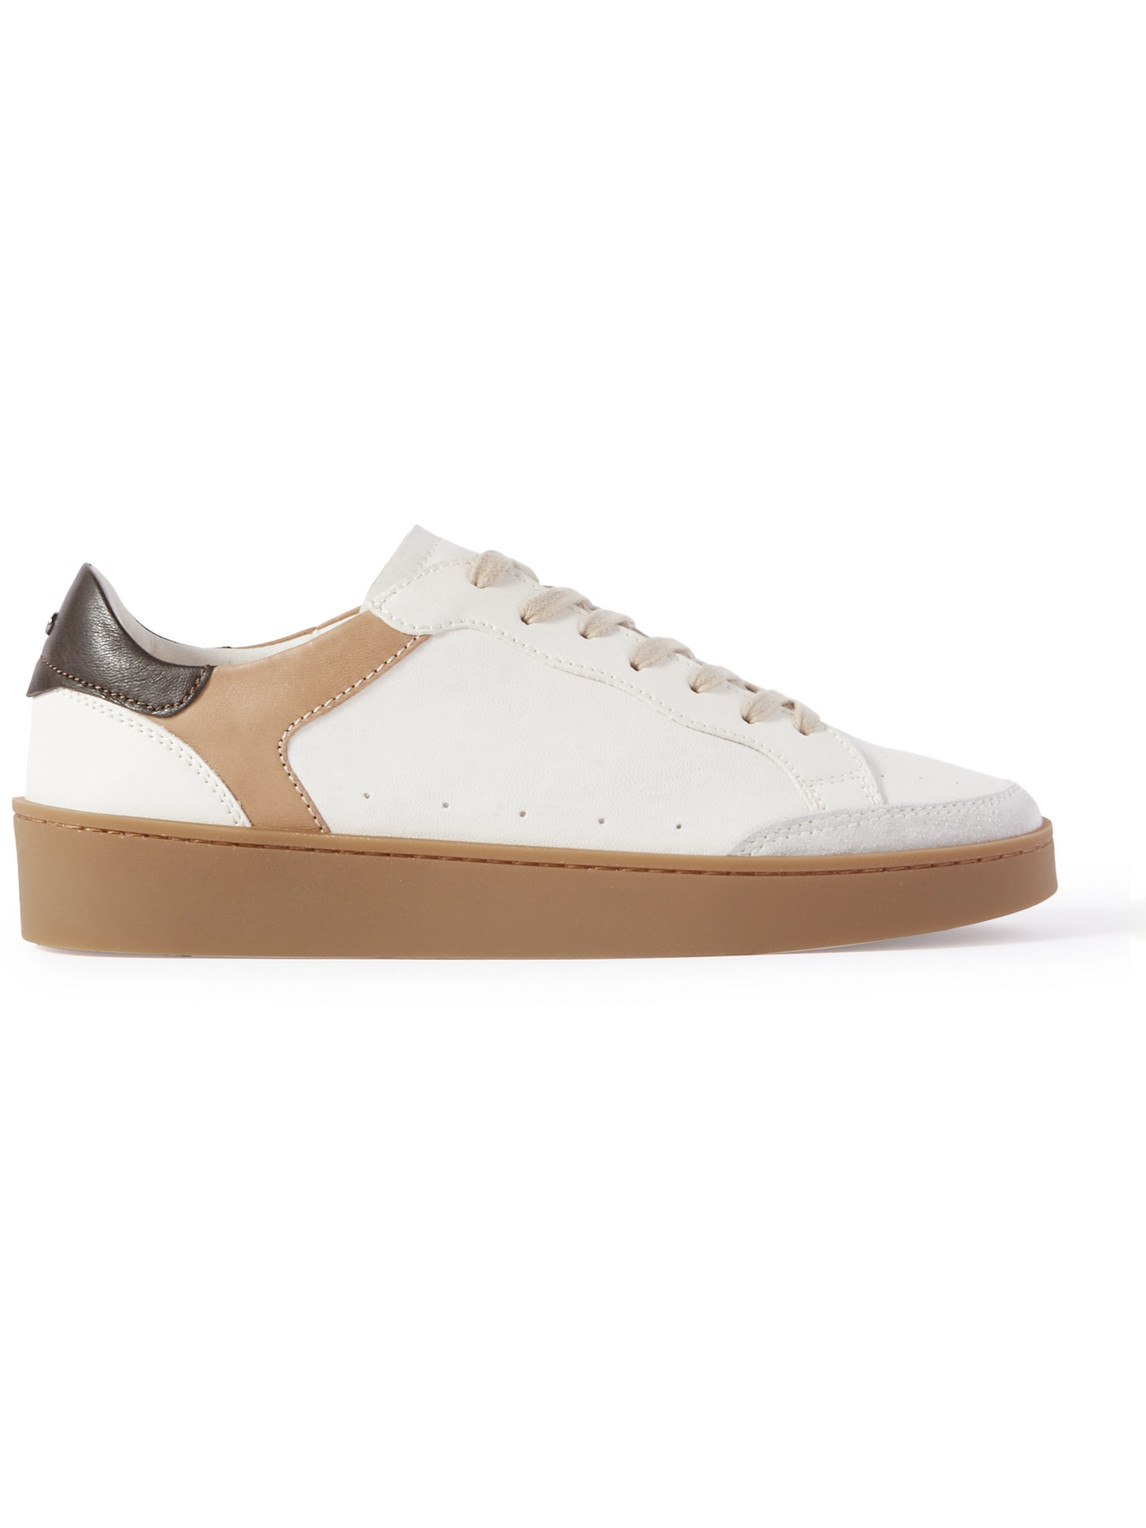 CANALI SUEDE-TRIMMED LEATHER SNEAKERS